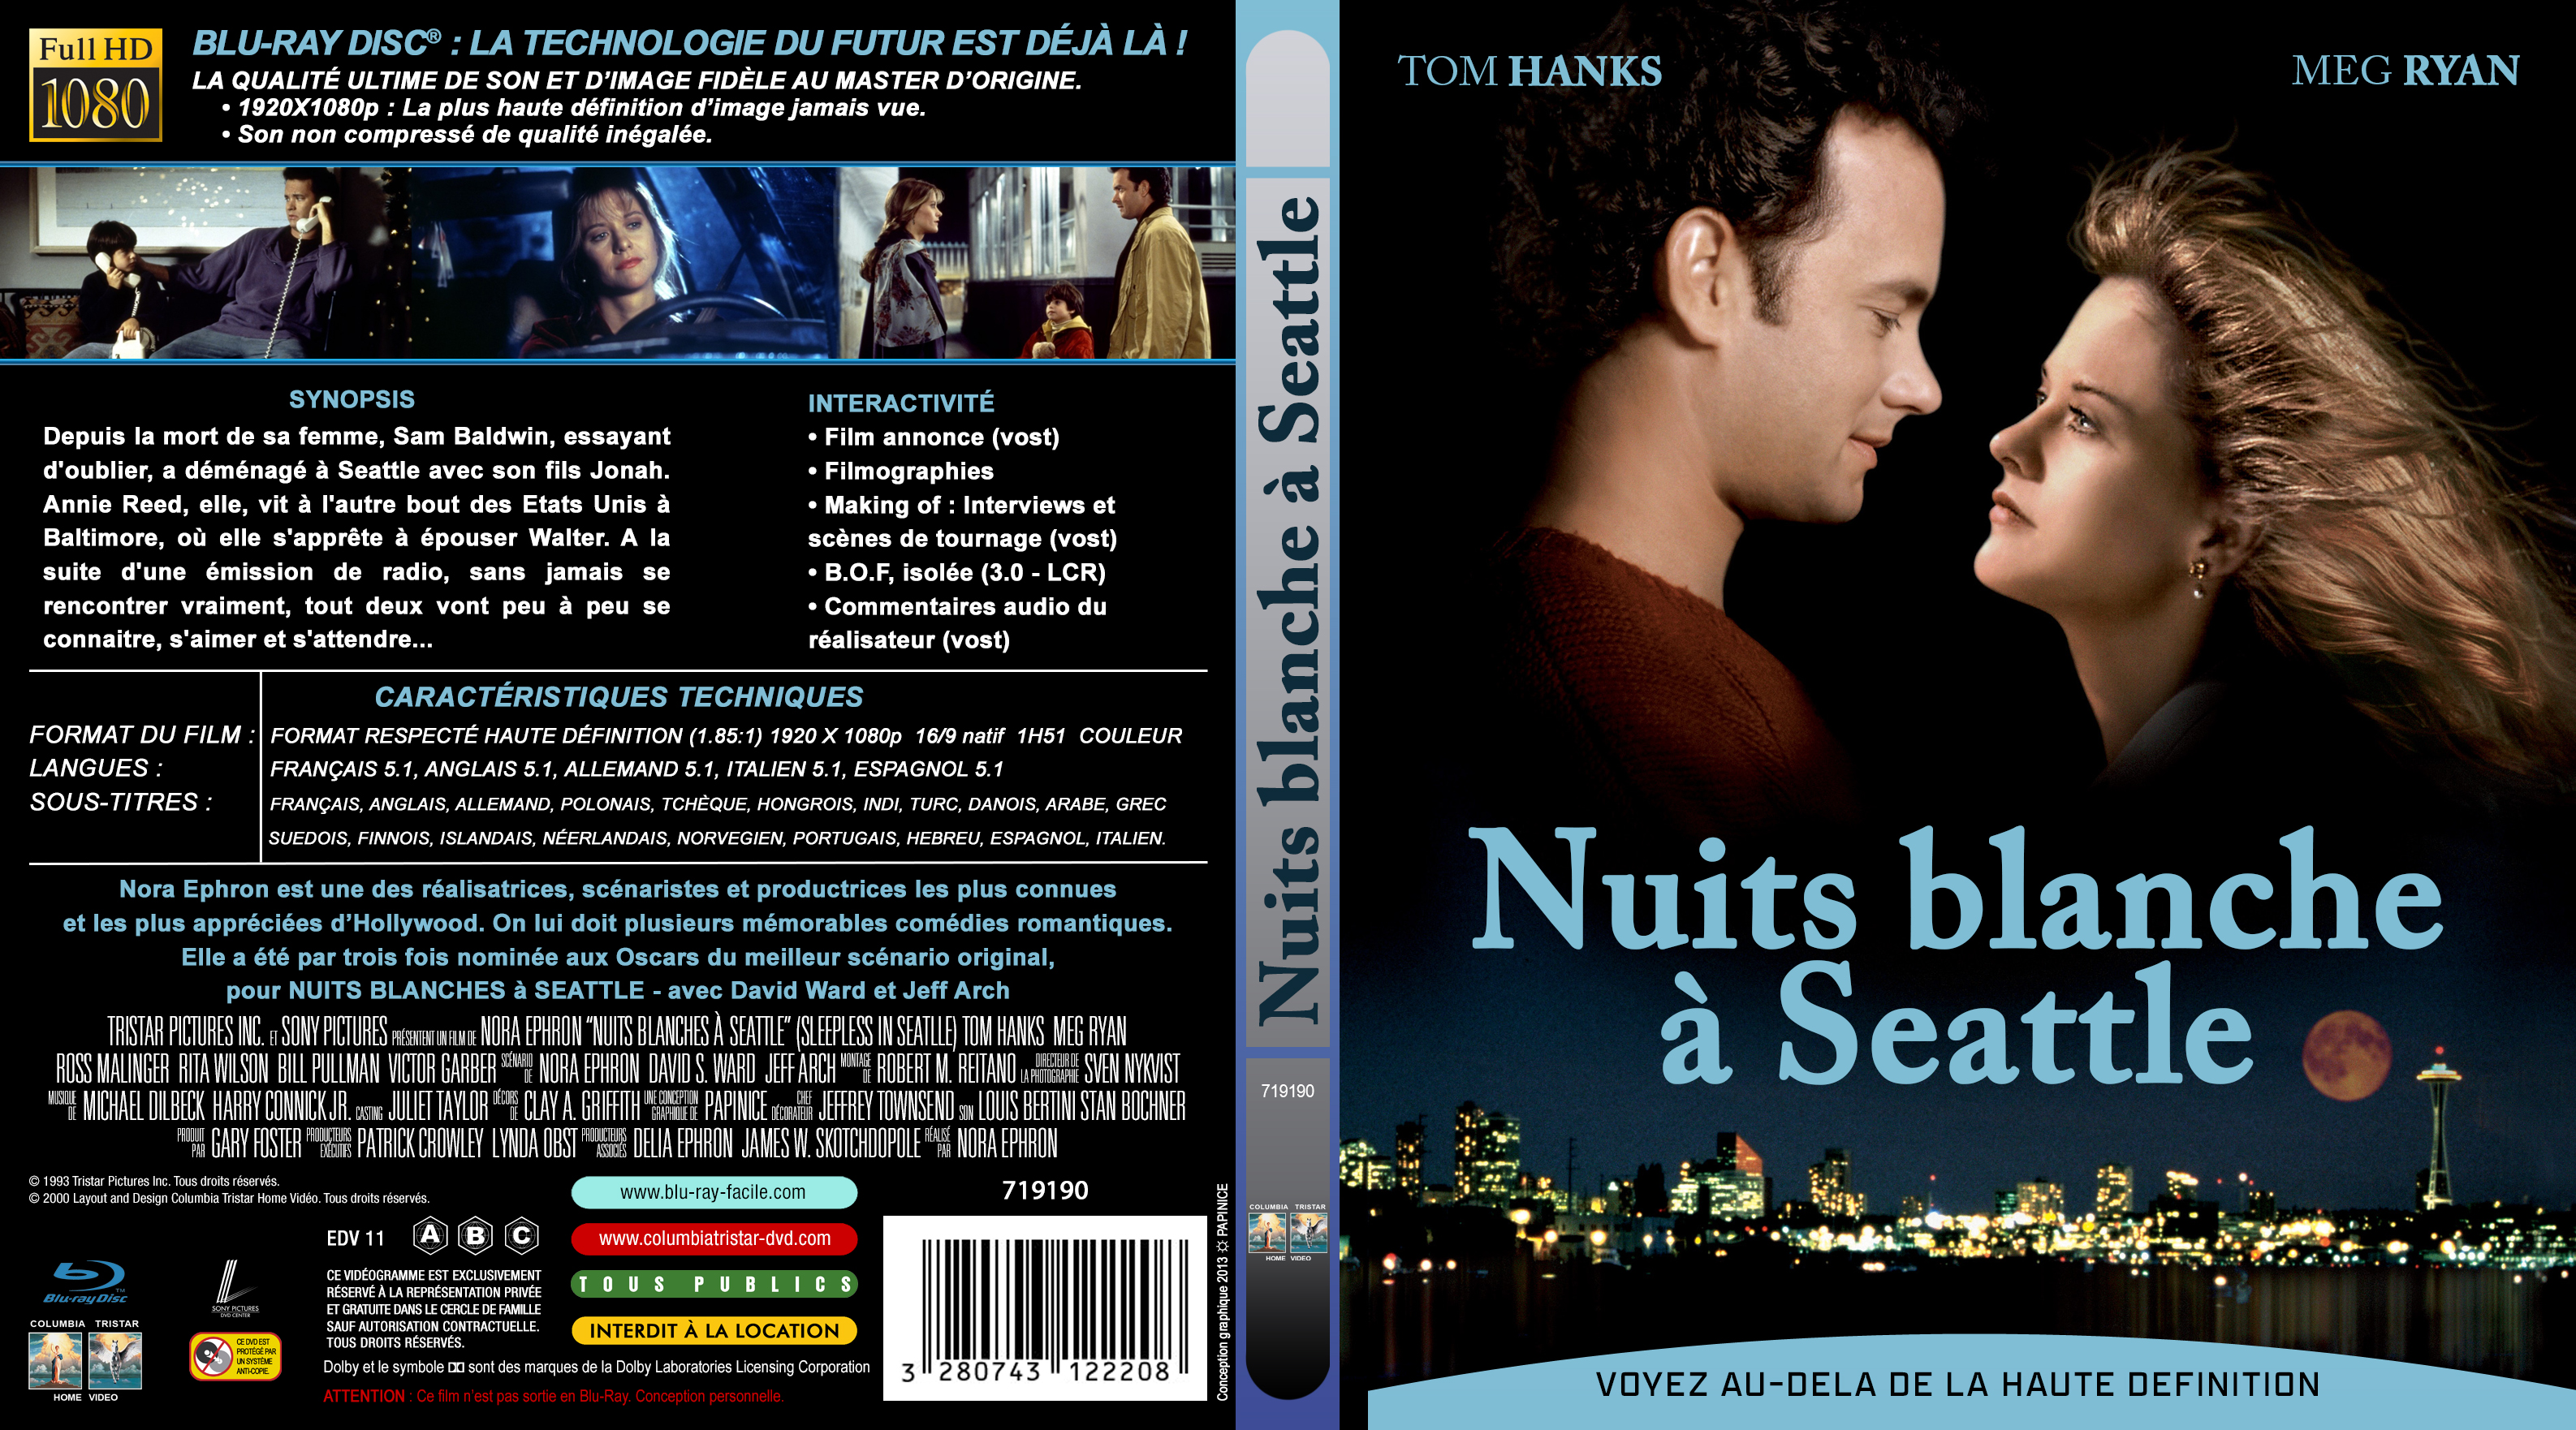 Jaquette DVD Nuits blanches  Seattle custom (BLU-RAY)